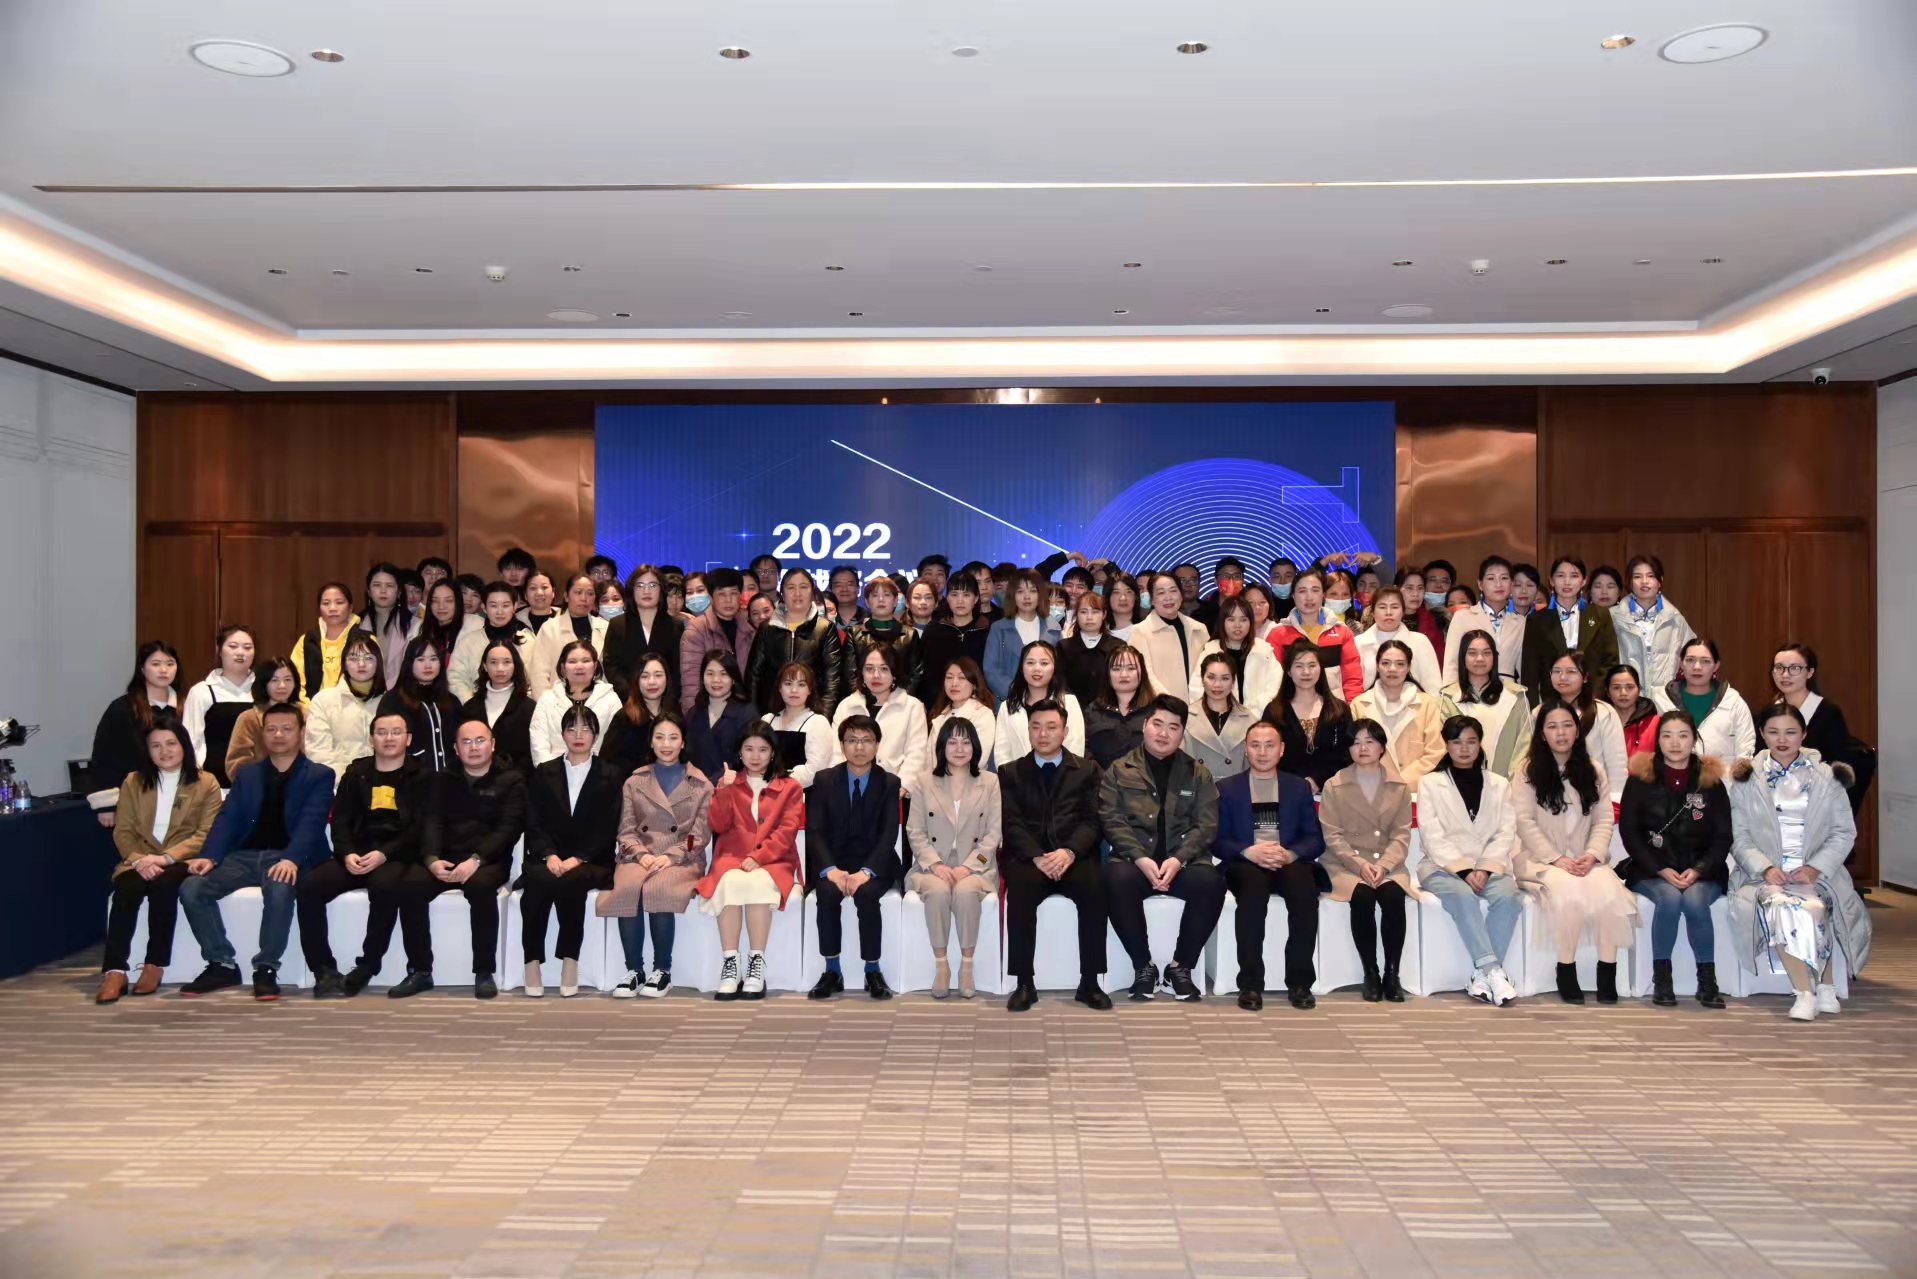 On February 19, 2022, the TXGA 2022 annual strategic planning meeting was grandly held. Tian Ziliang, general manager of the group, heads of various departments and all employees attended the meeting.